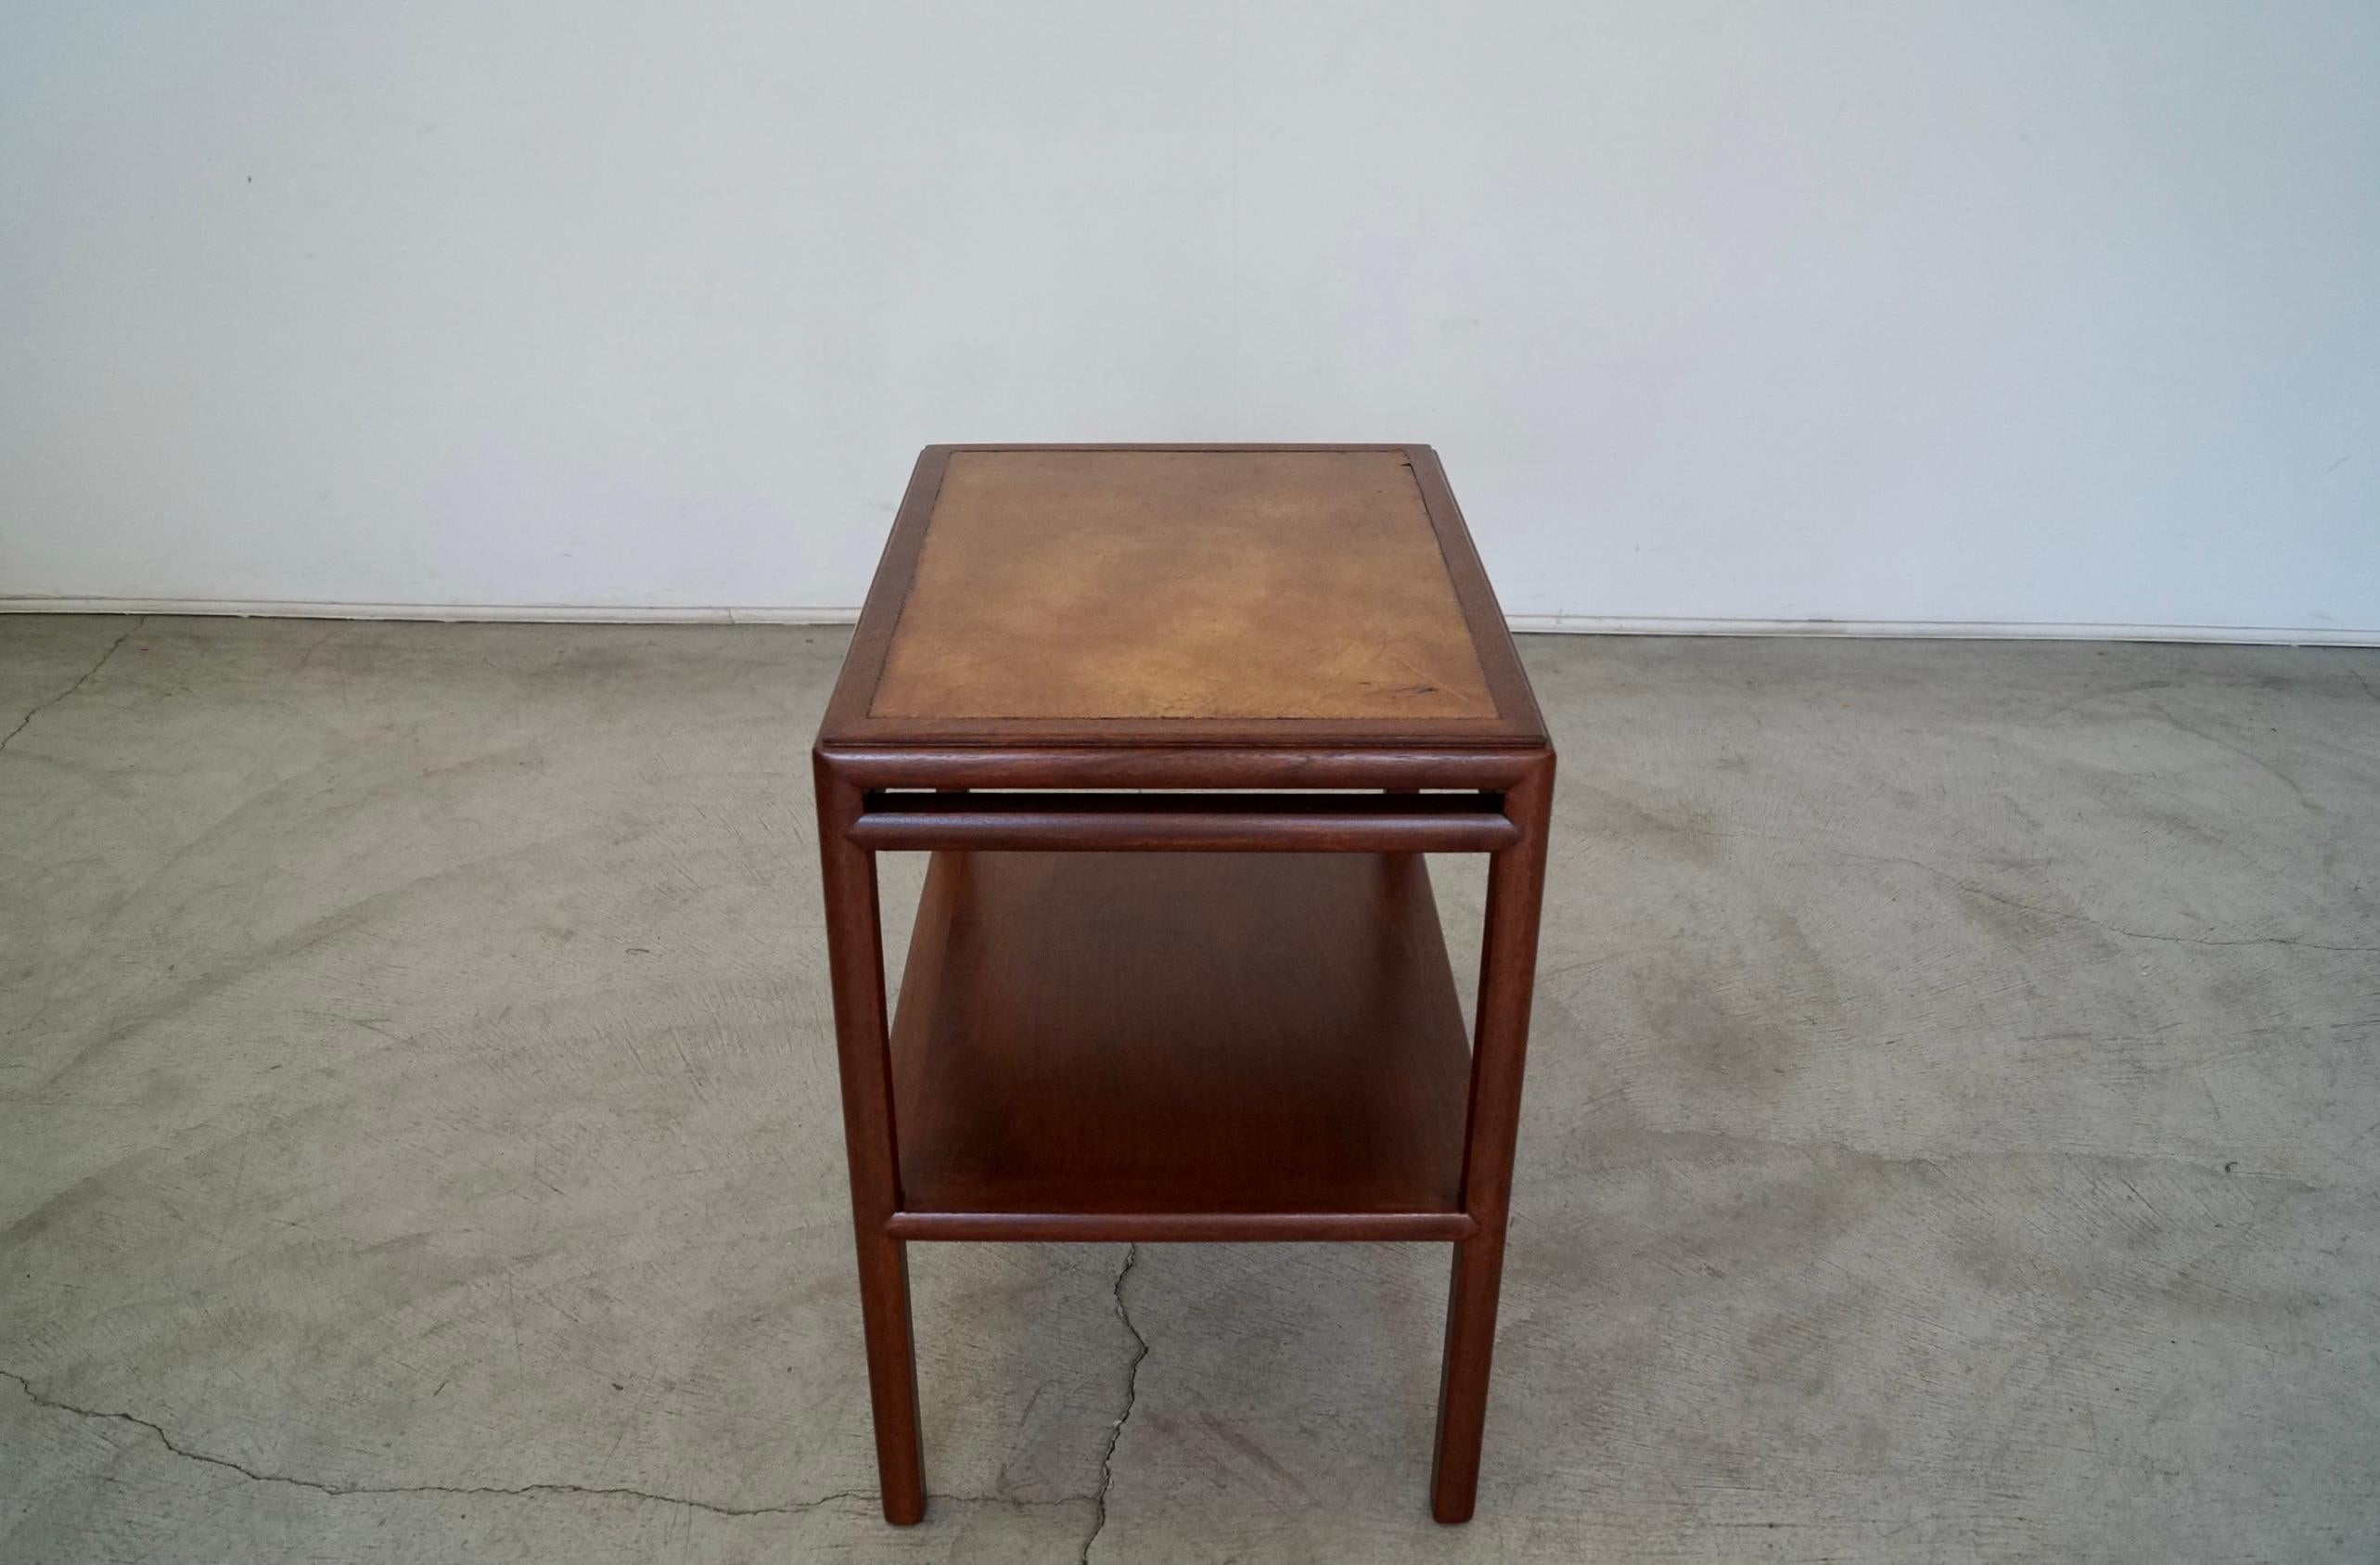 1950's Mid-Century Modern Leather End Table In Excellent Condition For Sale In Burbank, CA